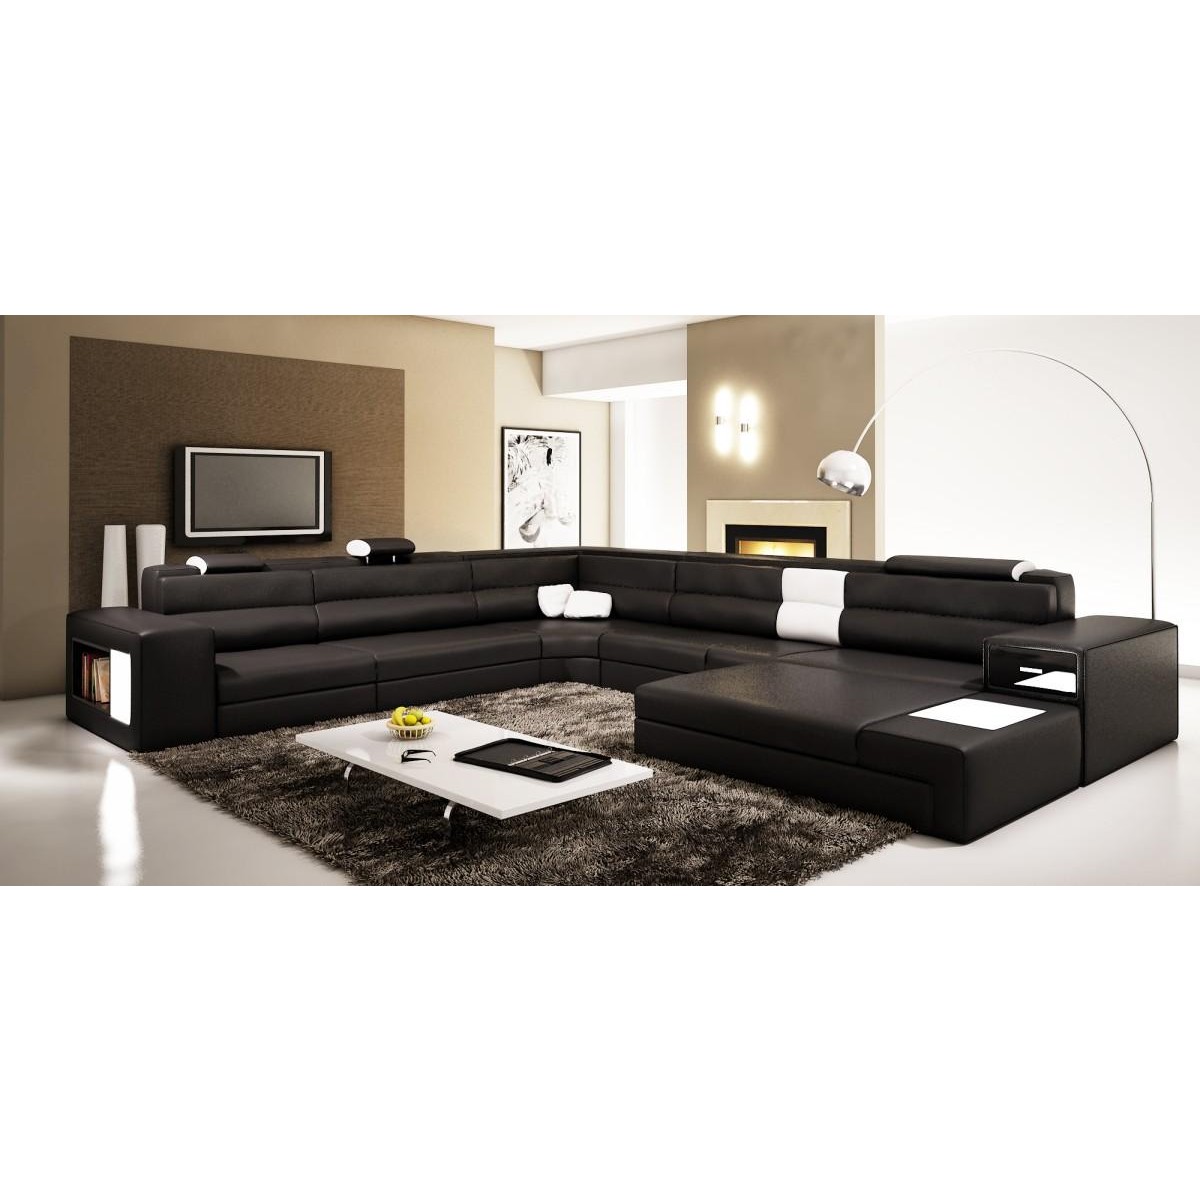 Black Contemporary Bonded Leather, 2 Piece Contemporary Bonded Leather Sectional Sofa Black